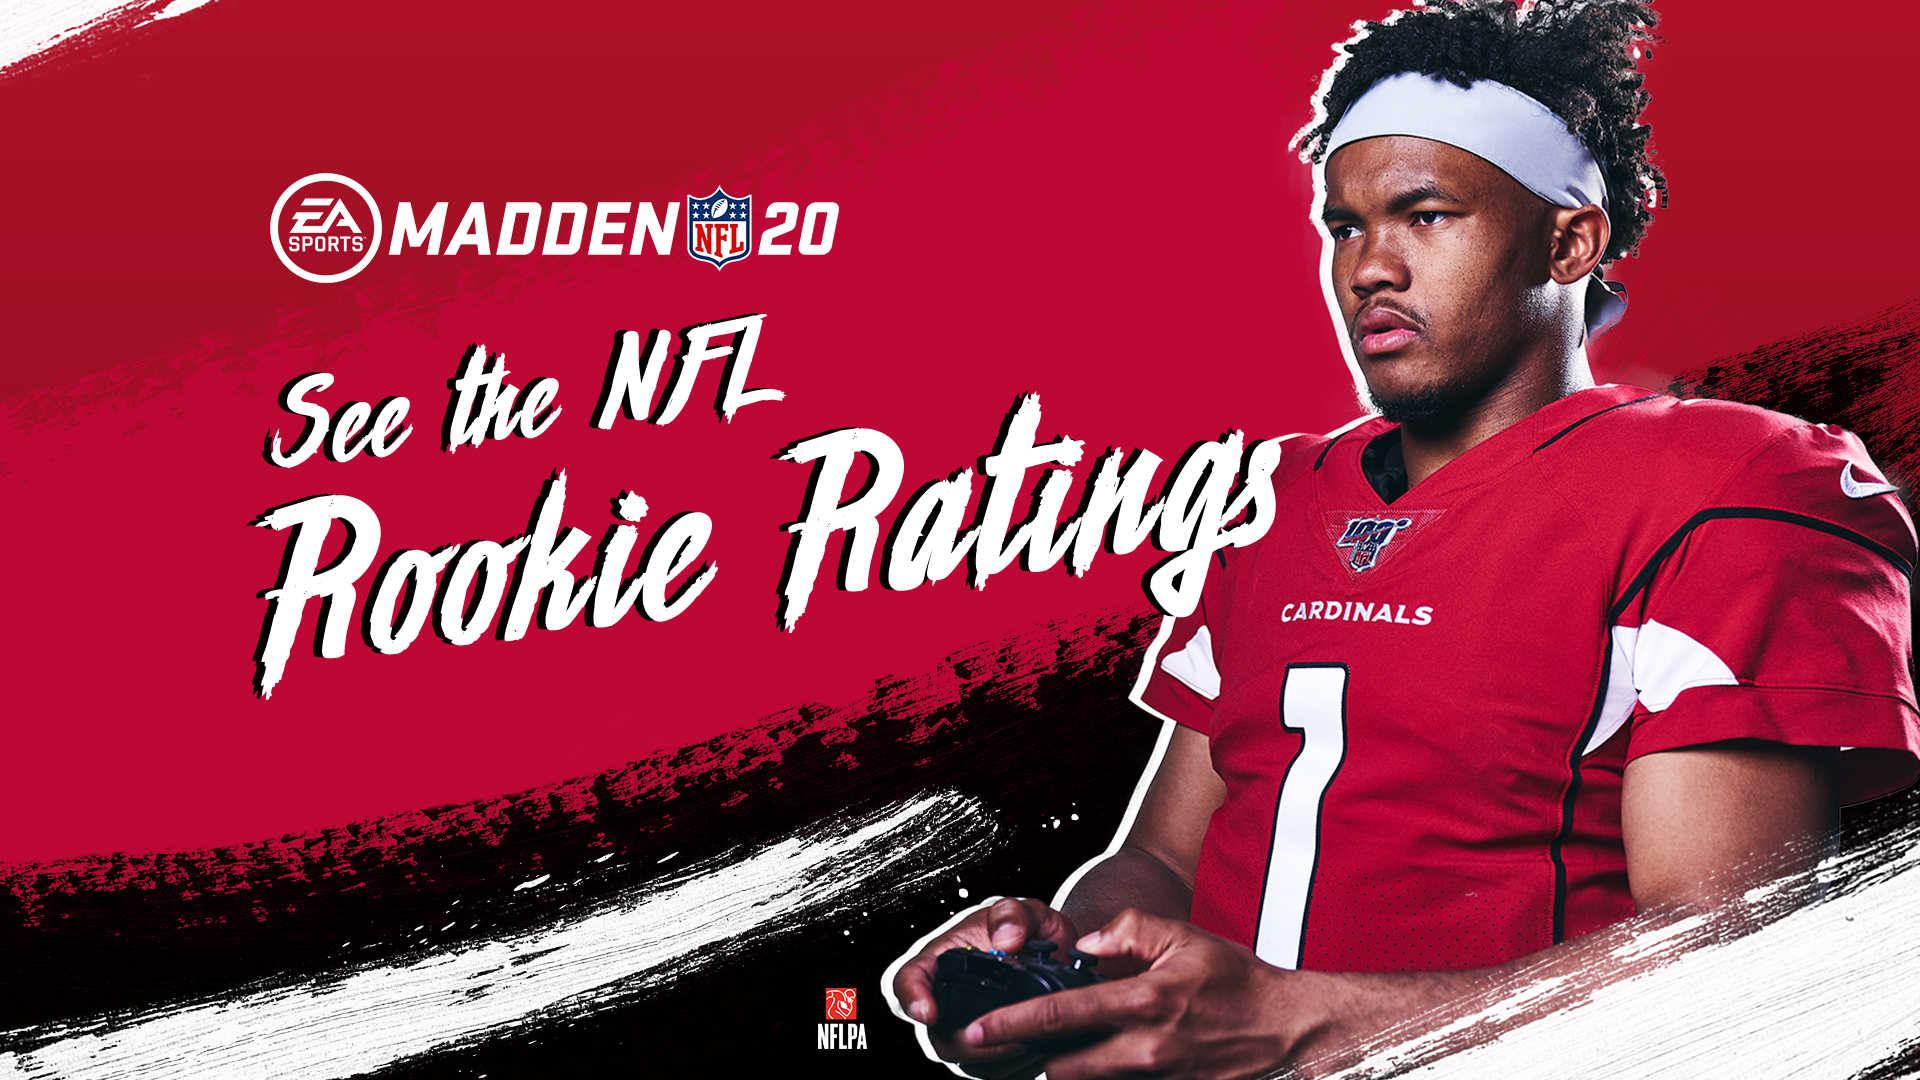 Madden 20 consoles